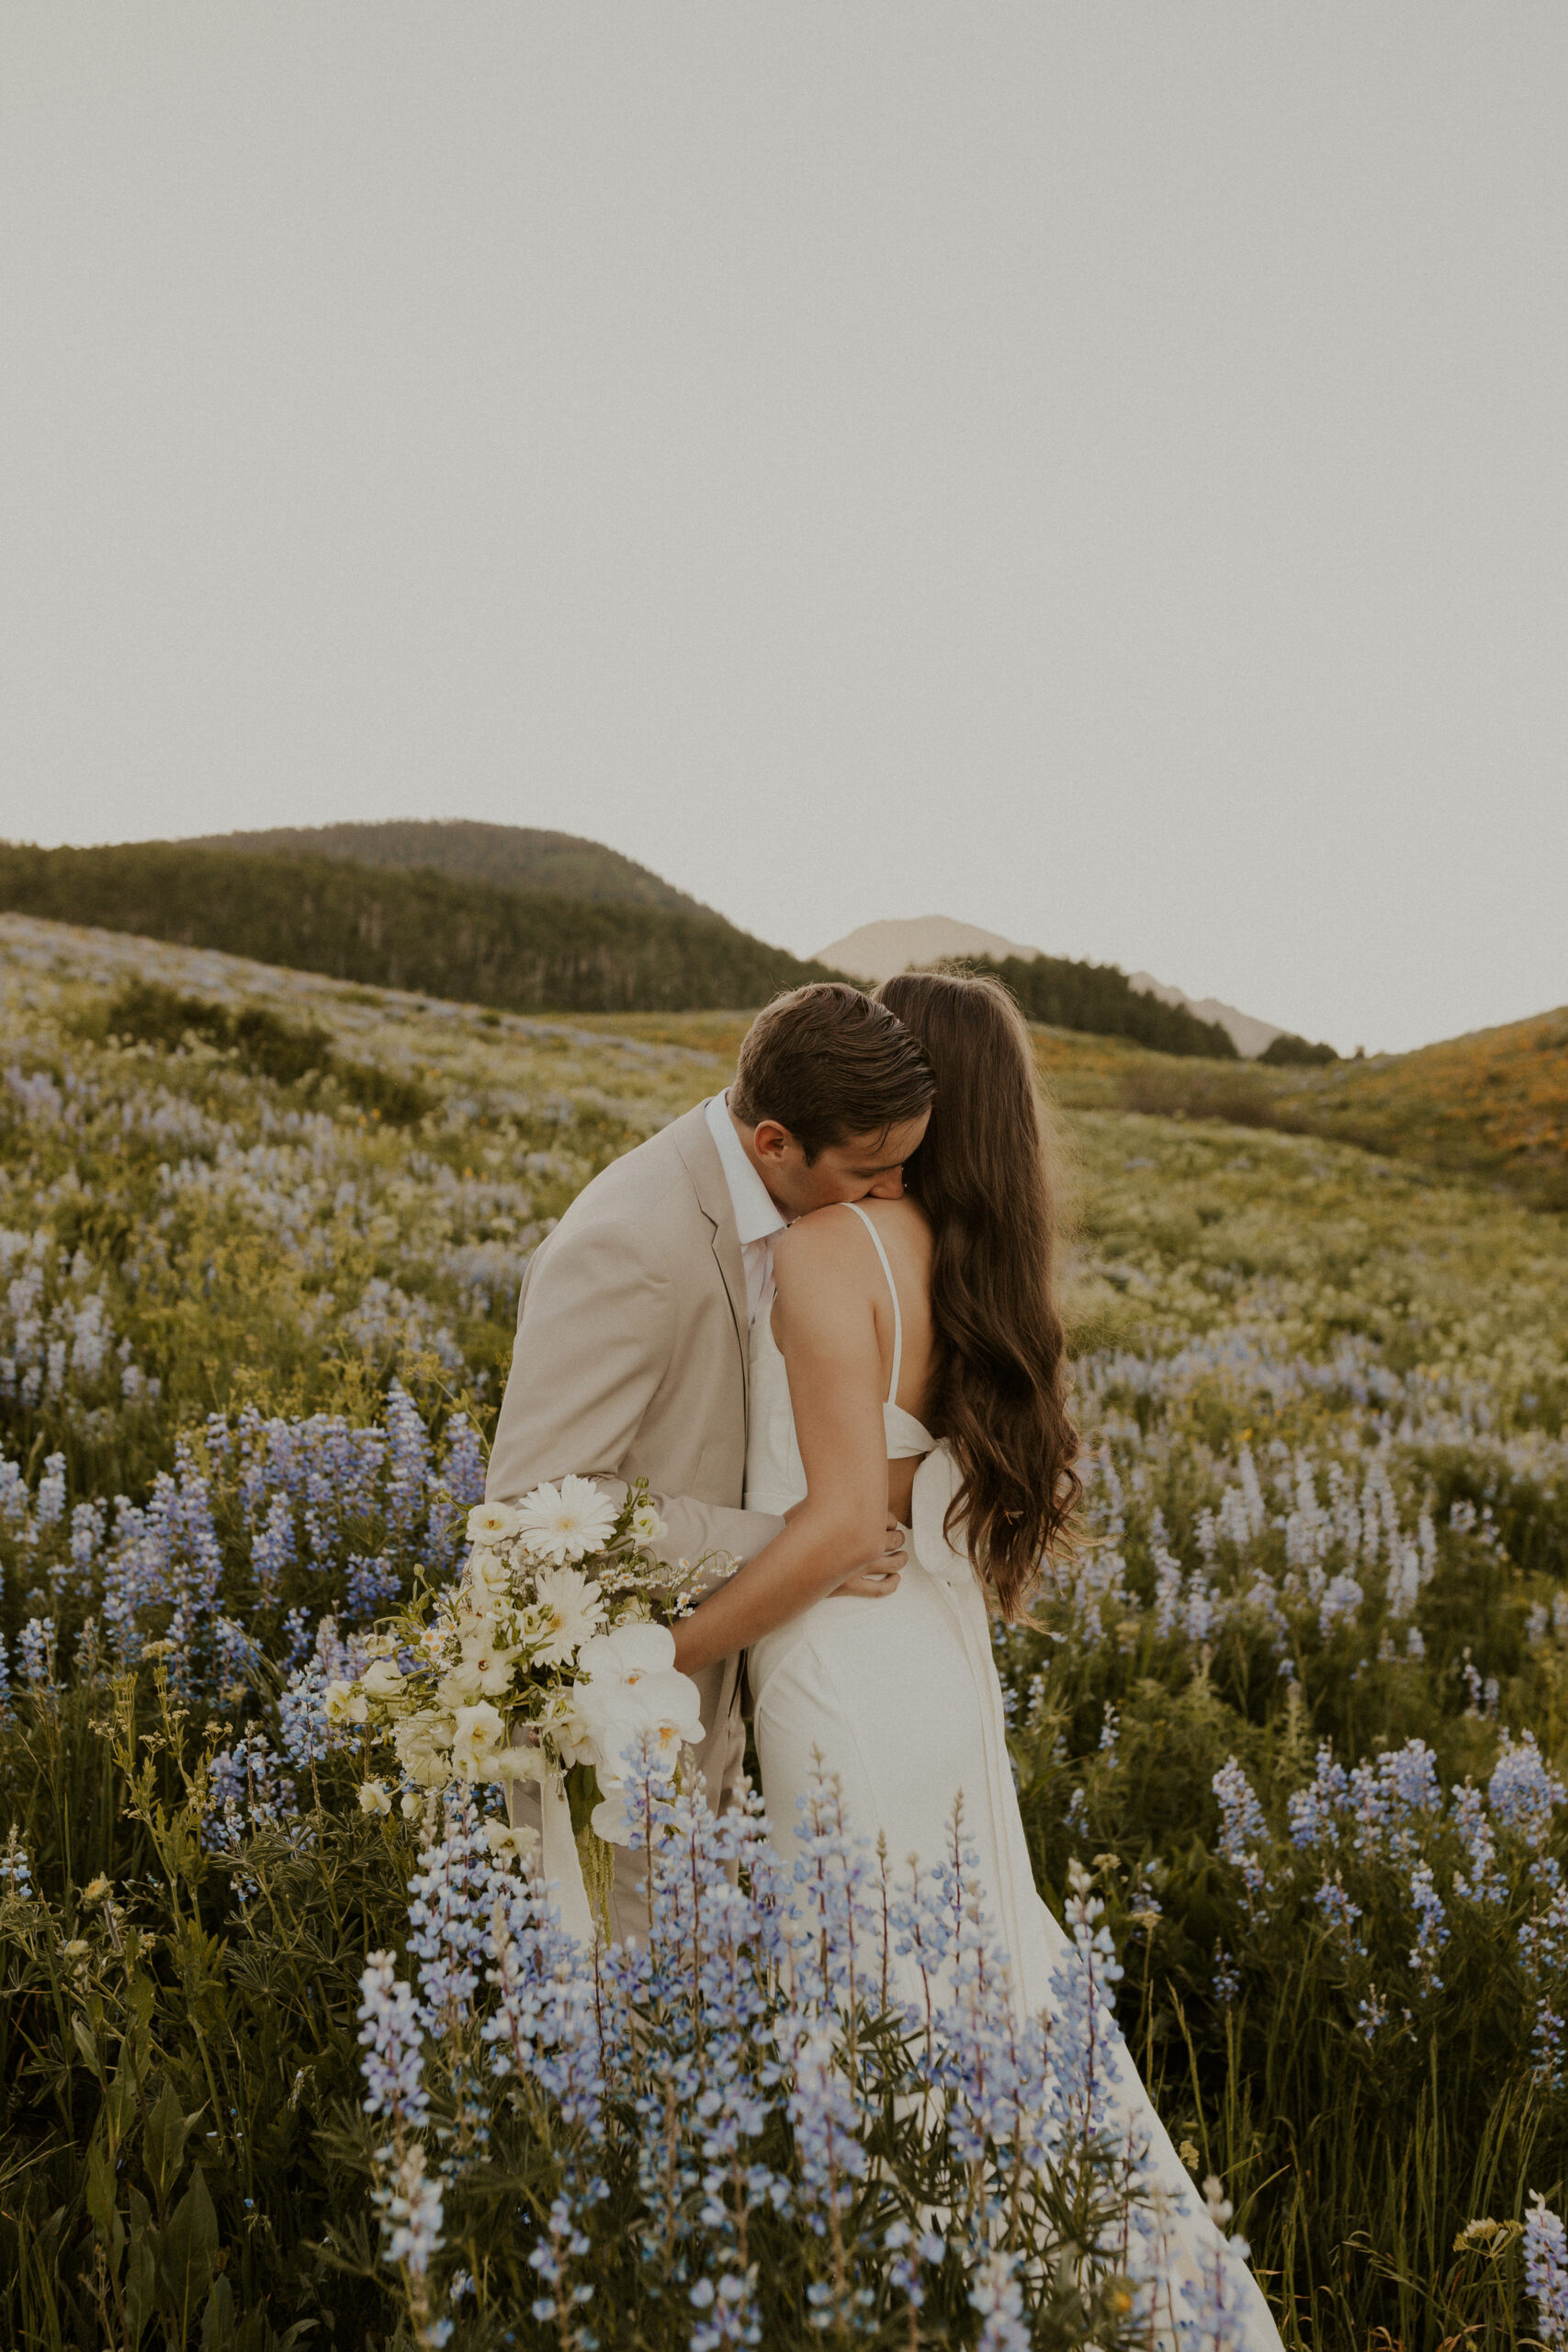 Keely and Jackson's timeless romantic elopement amongst the wildflowers in Colorado's mountain town Crested Butte.